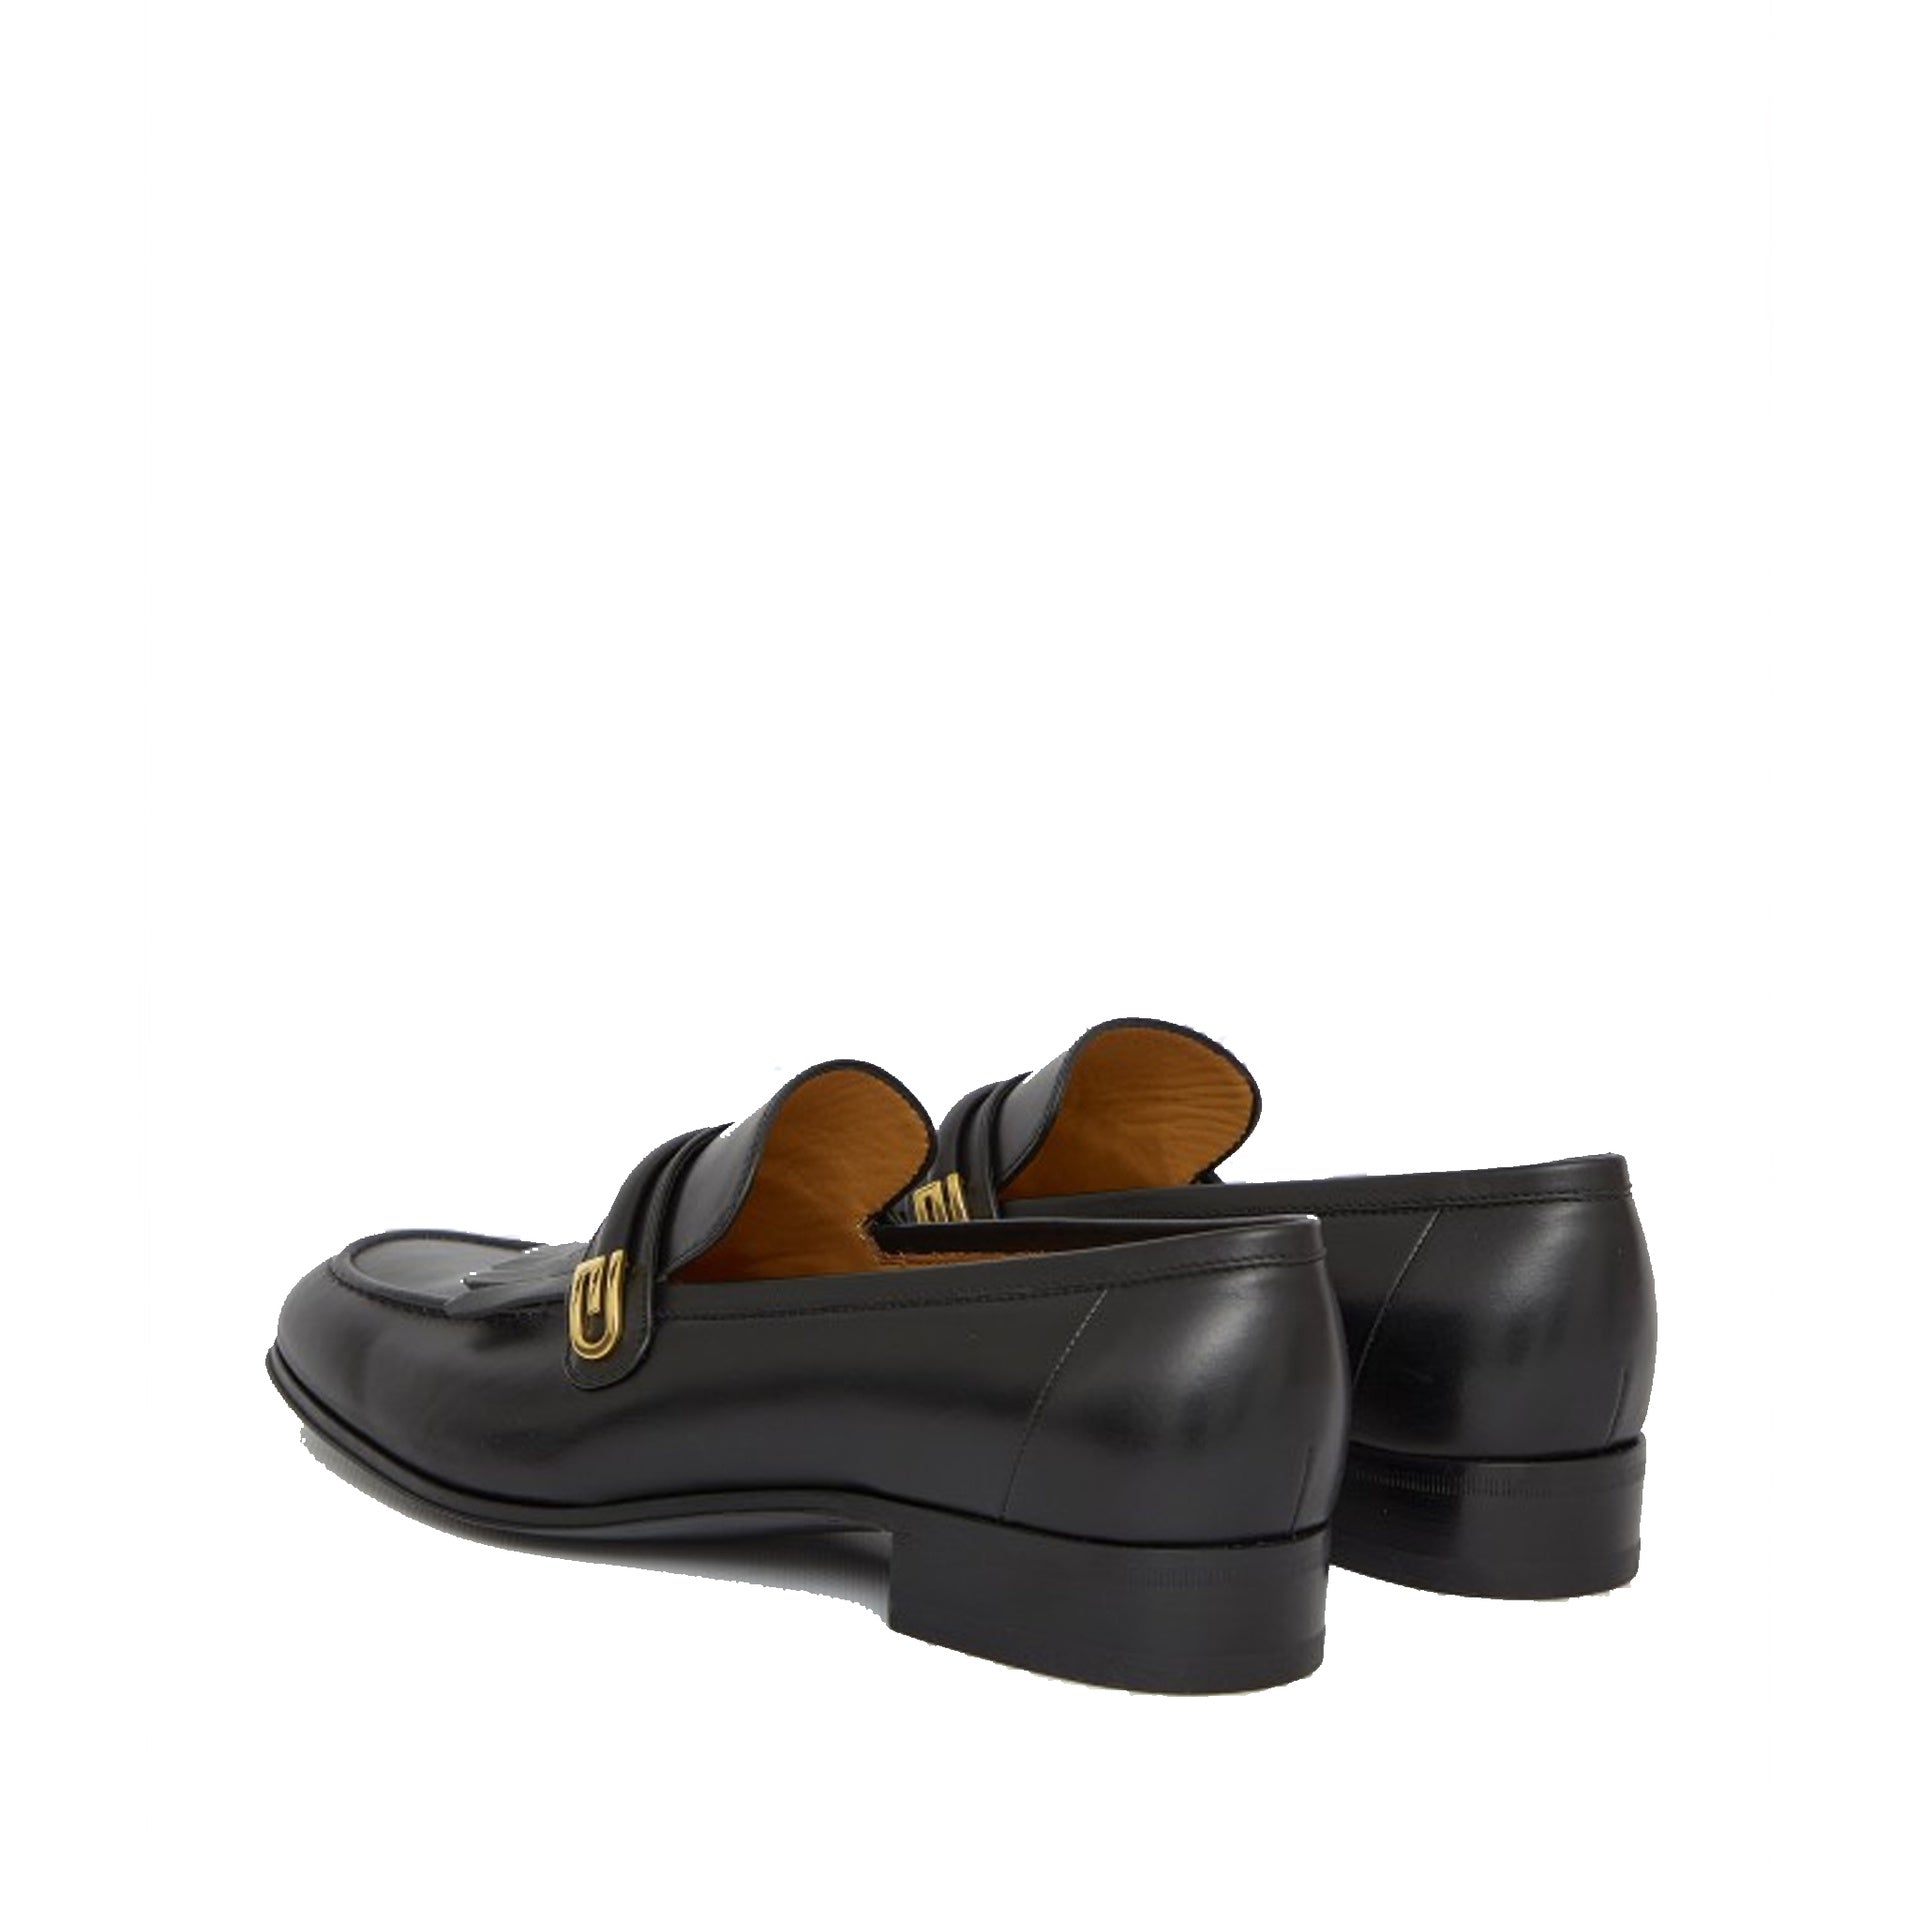 GUCCI_GUCCI_Leather_Loafers_714680_06F00_1000_Black_3.jpg